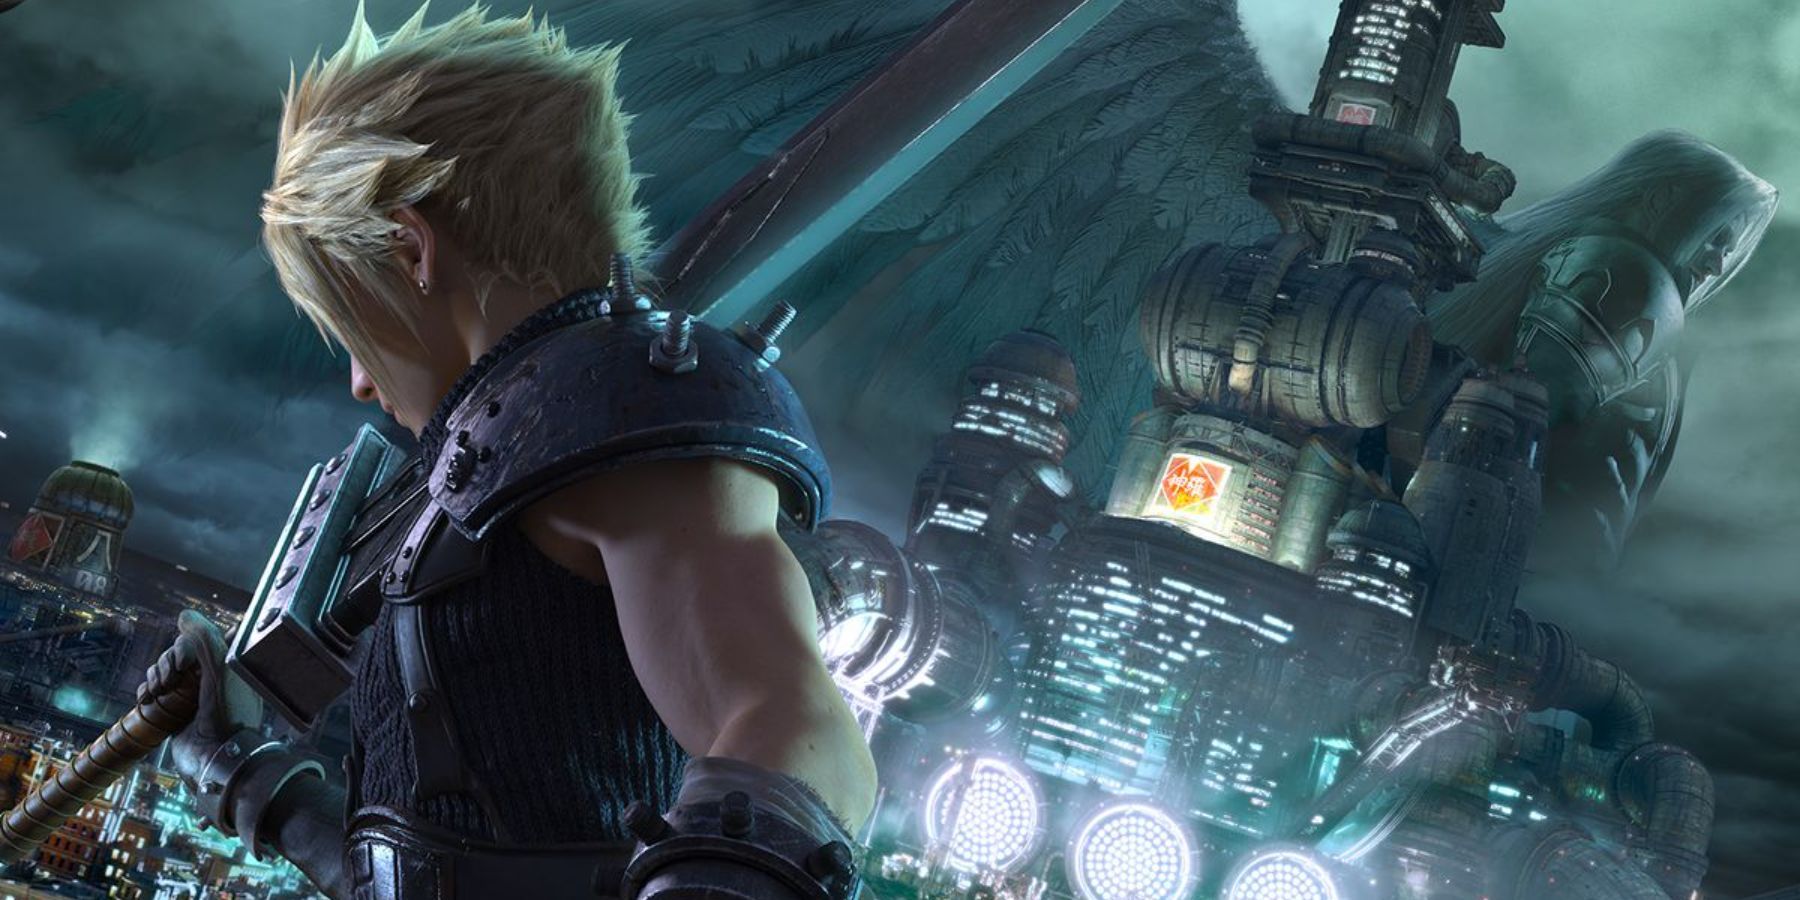 Final Fantasy 7 Remake Part 3 Could End Up Mirroring The Original in a Neat Way